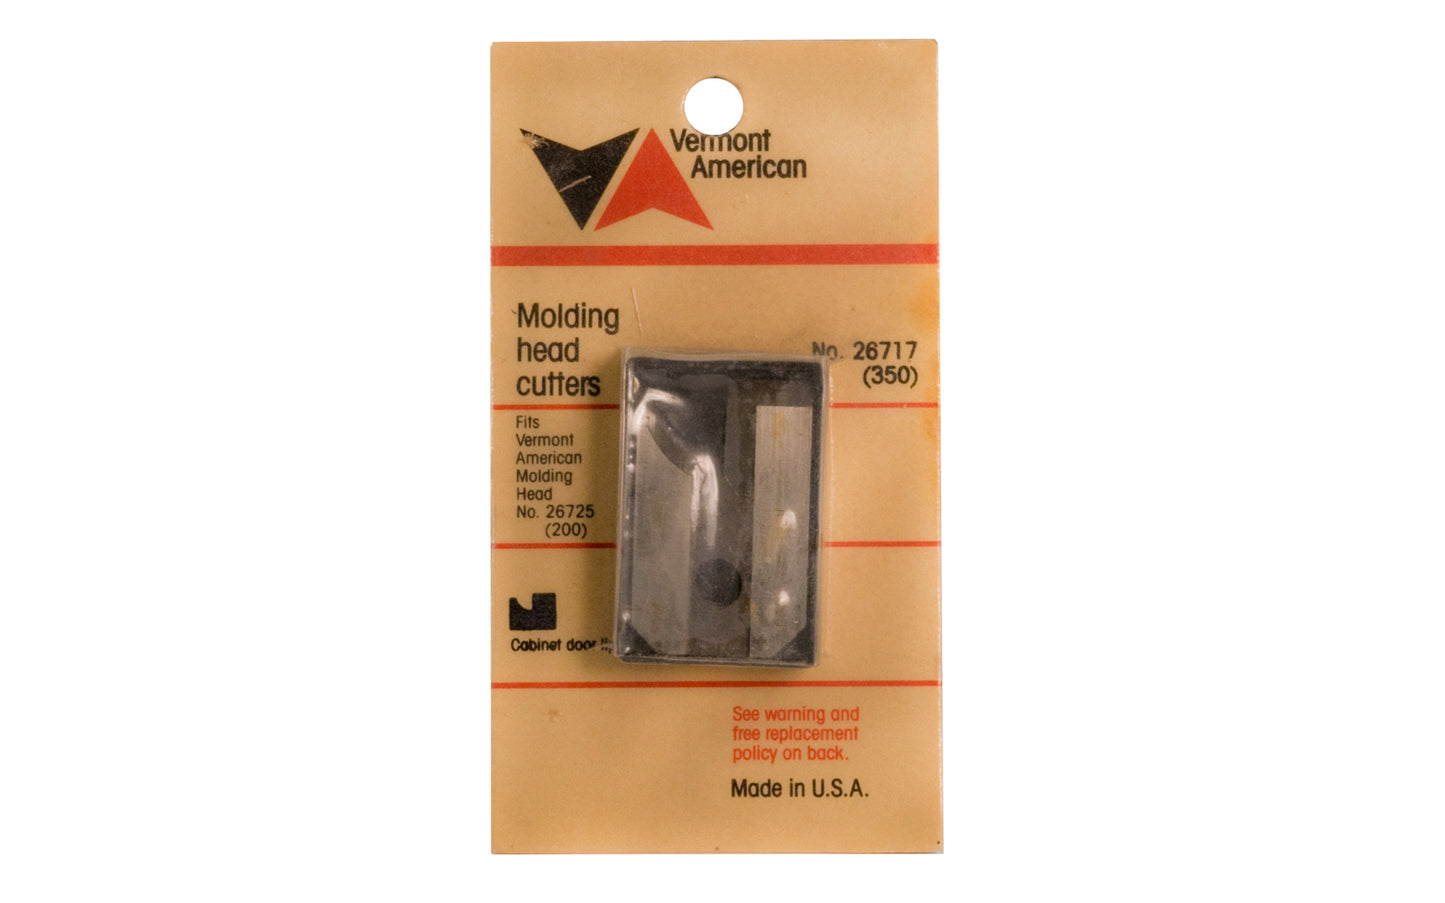 Vermont American Moulding Head Cutters - No. 26716 (304). Fits Vermont American Molding Head No. 26725 (200). Cabinet door tip. Made in USA. 